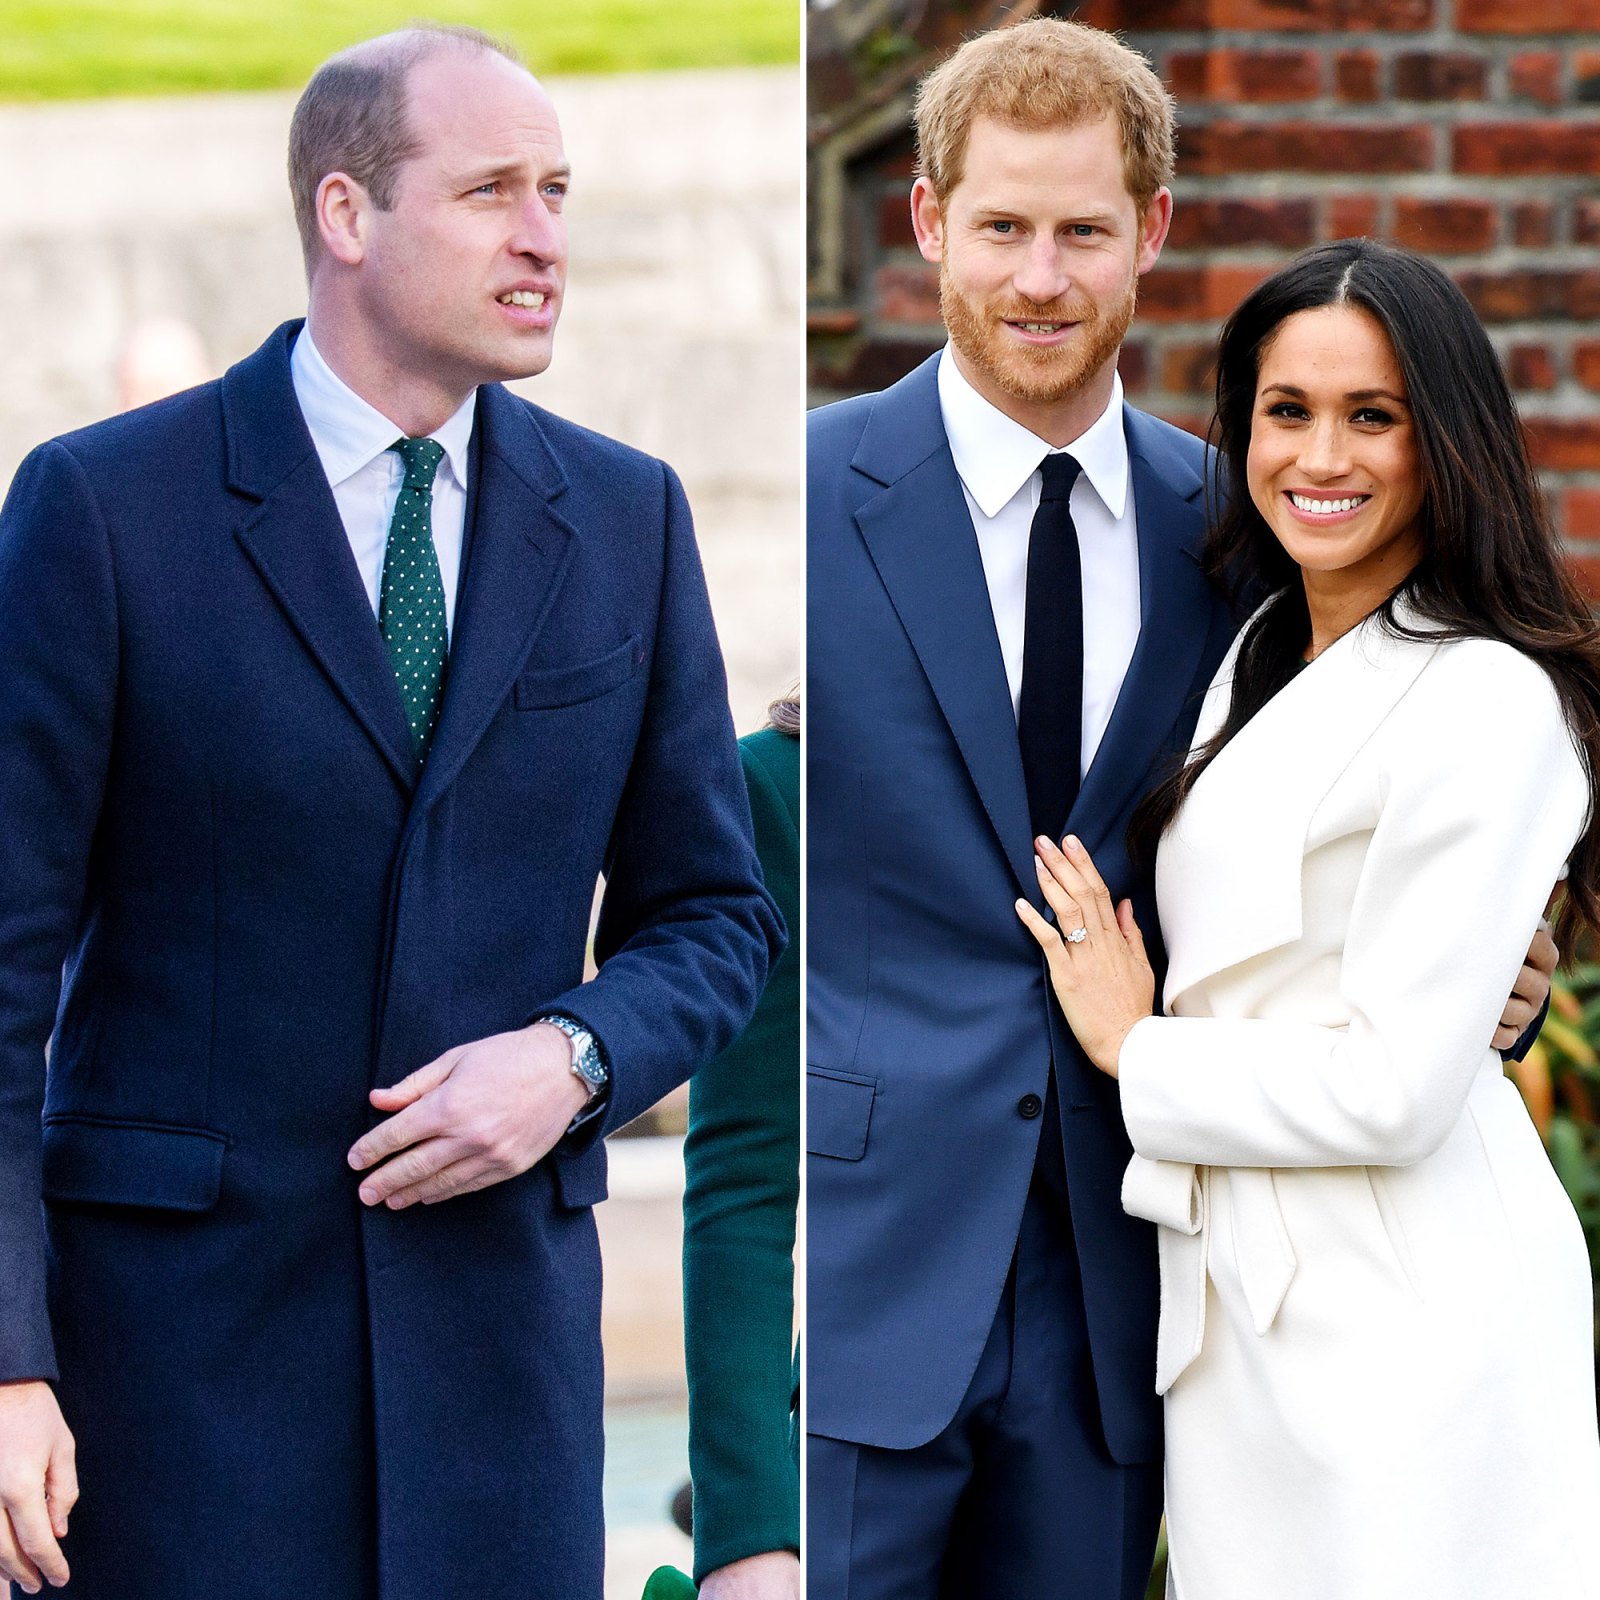 Prince William Prince Harry and Meghan Markle